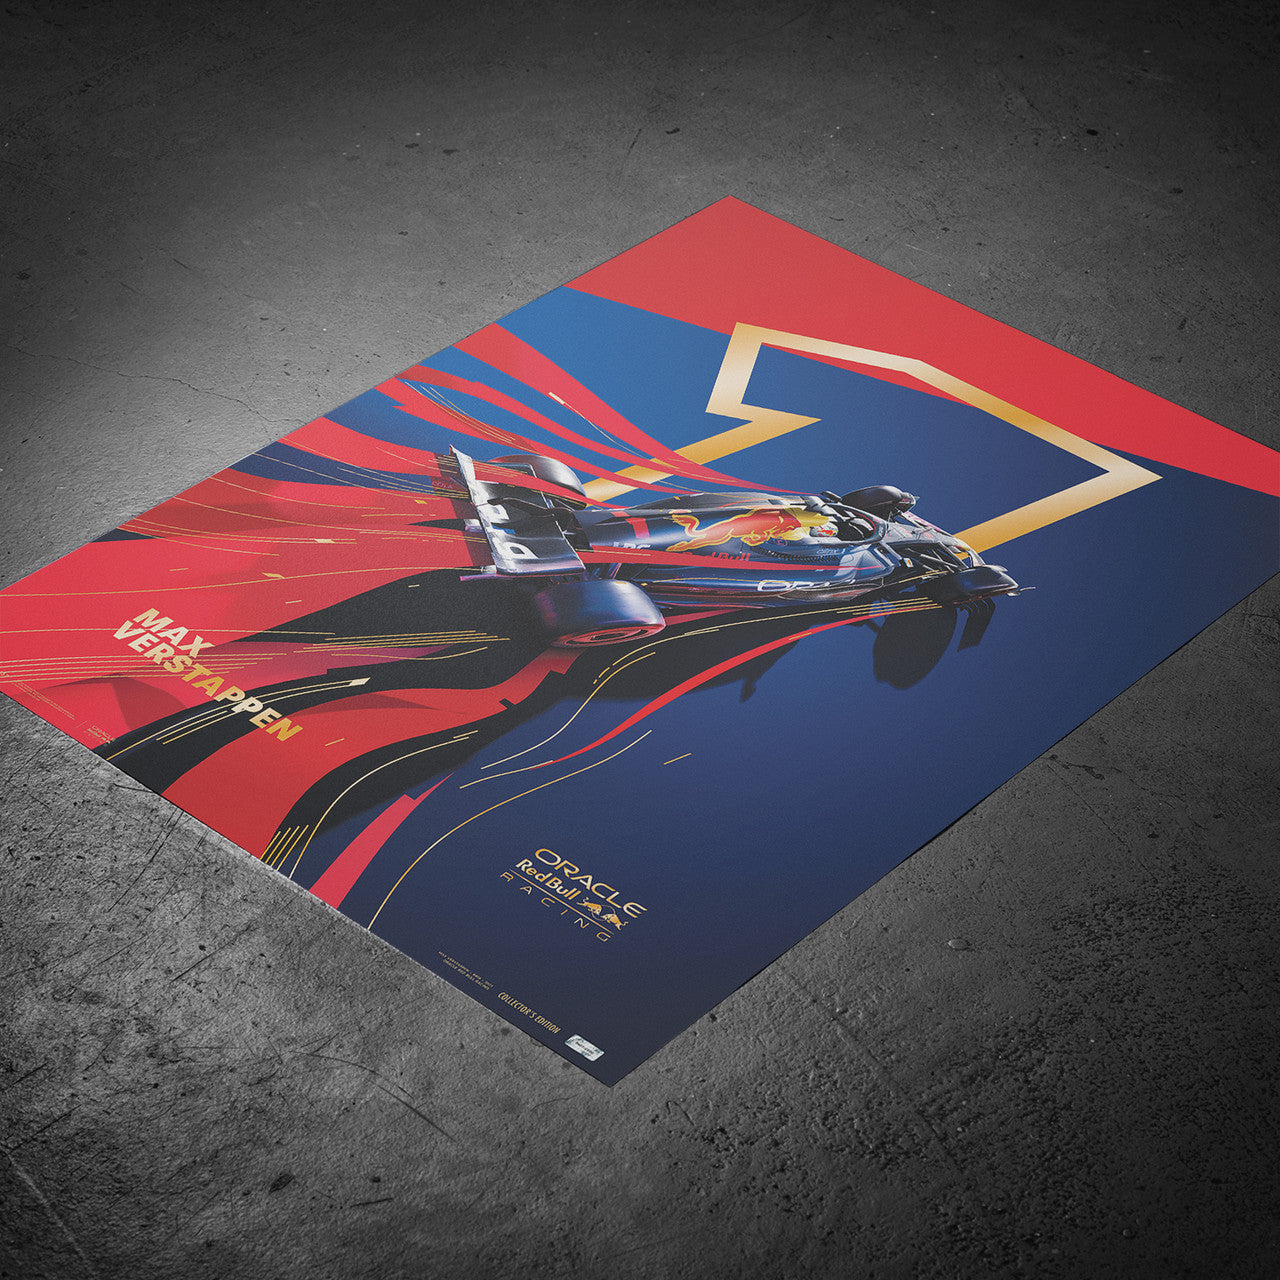 Oracle Red Bull Racing 2022 Max Verstappen Special Edition